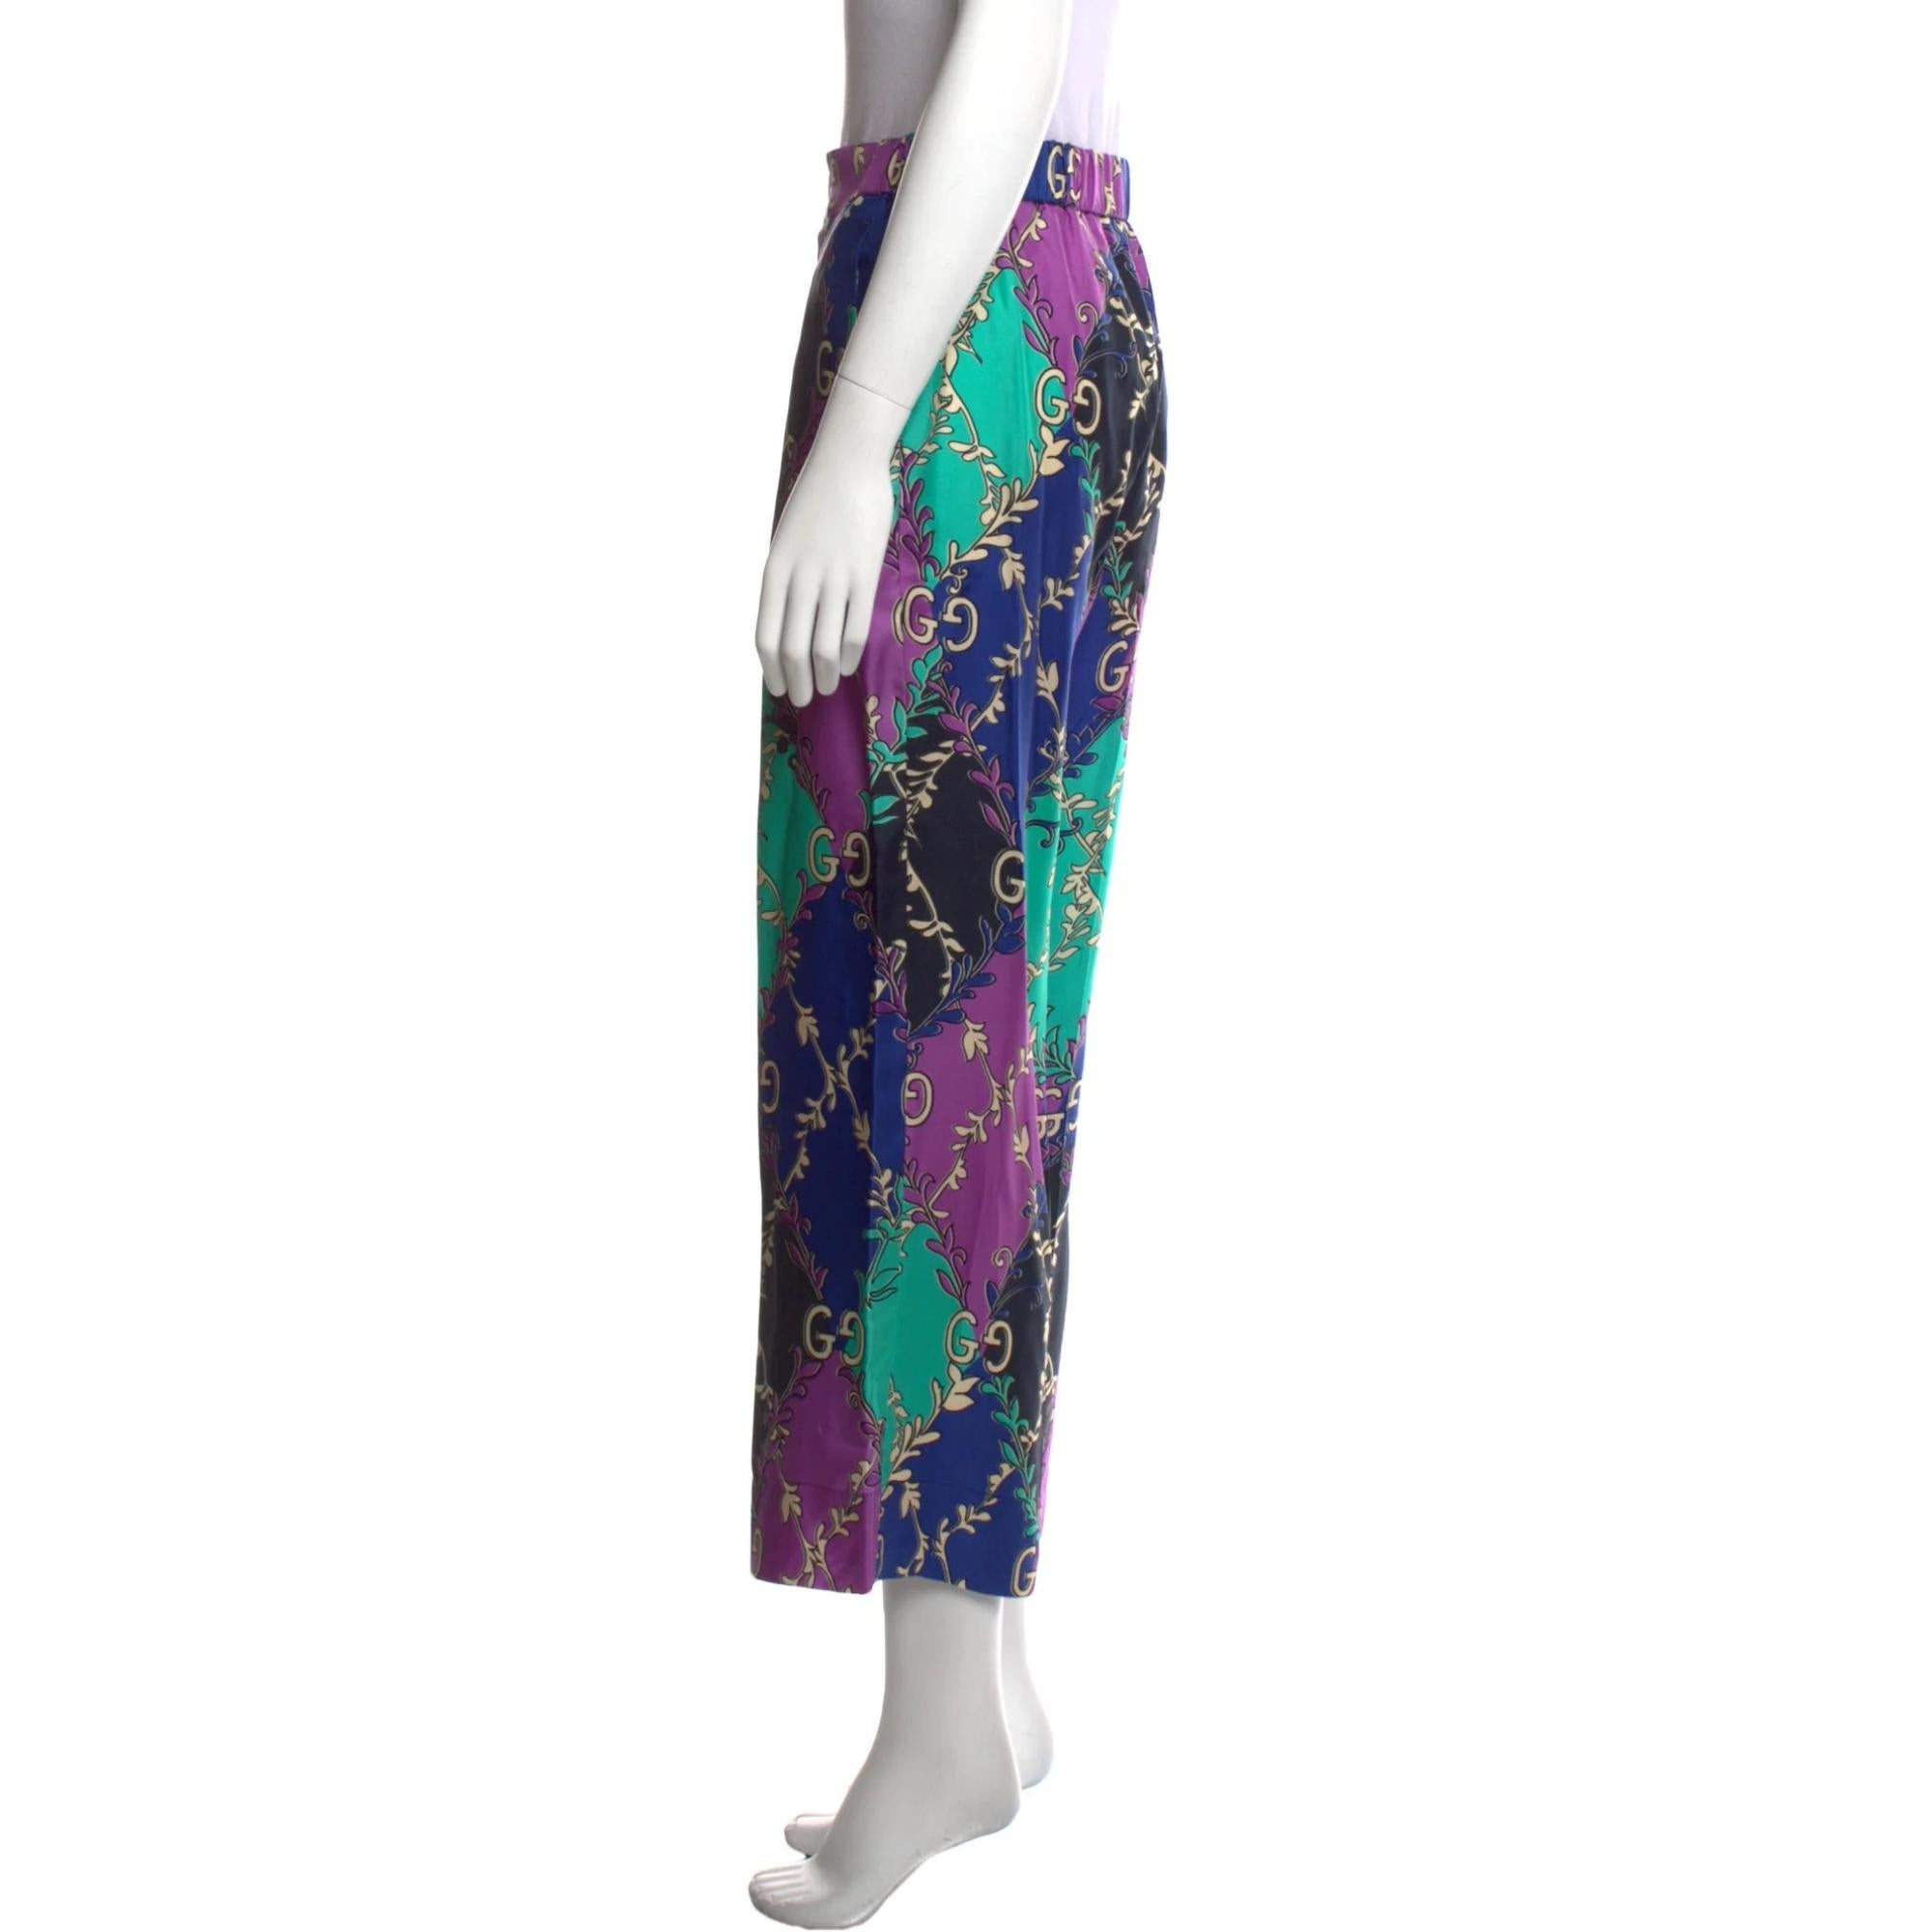 Gucci Silk Wide Leg Pants. By Alessandro Michele. Blue, purple, and turquoise. GG monogram vines. High-Rise. GG Logo. Slit Pockets. Zip & Button Closure. Pants by Gucci typically fit true to size.

Color: Purple / Mulit
Material: 100%